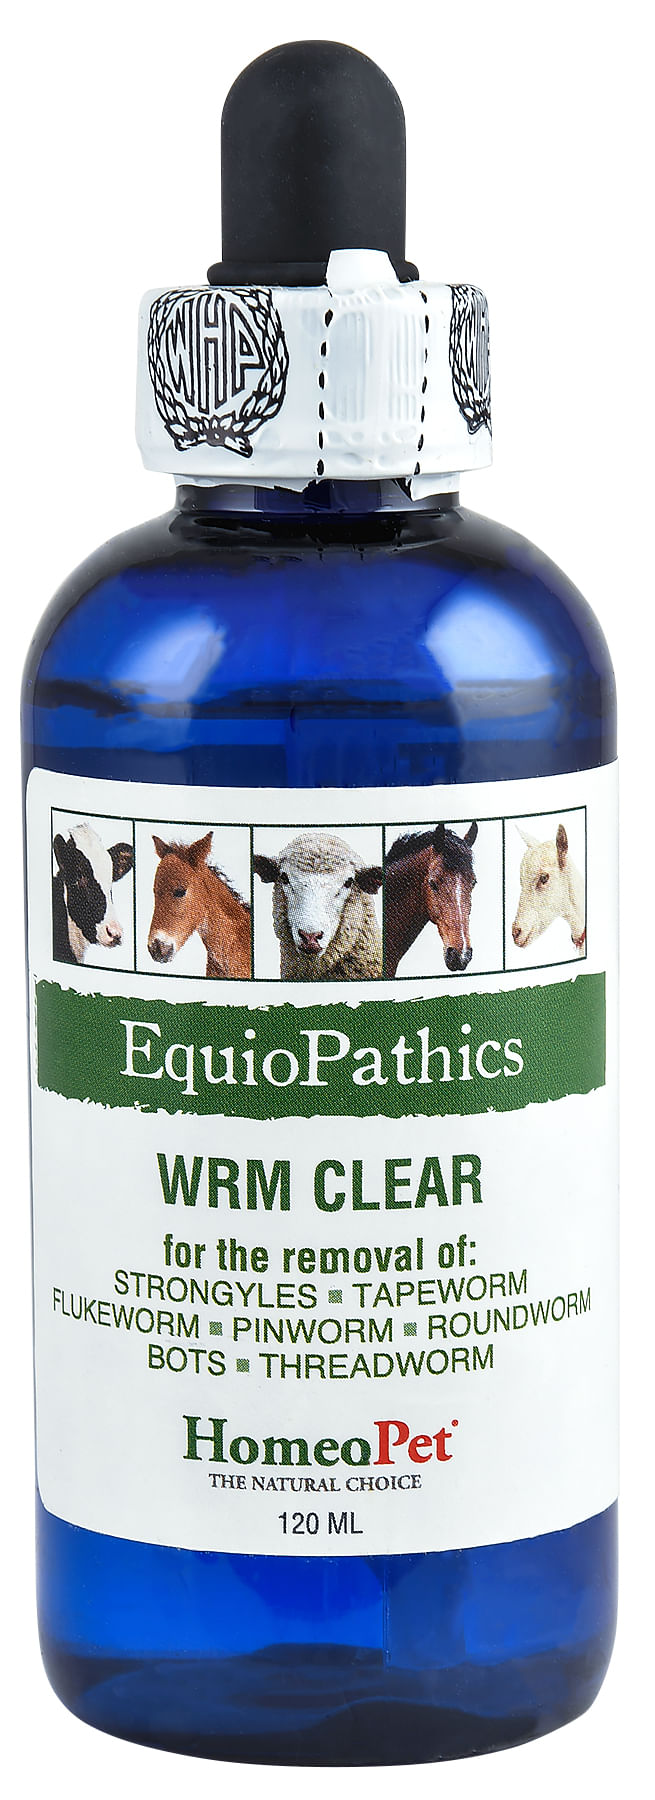 Wrm-Clear-120-mL--20-day-supply-